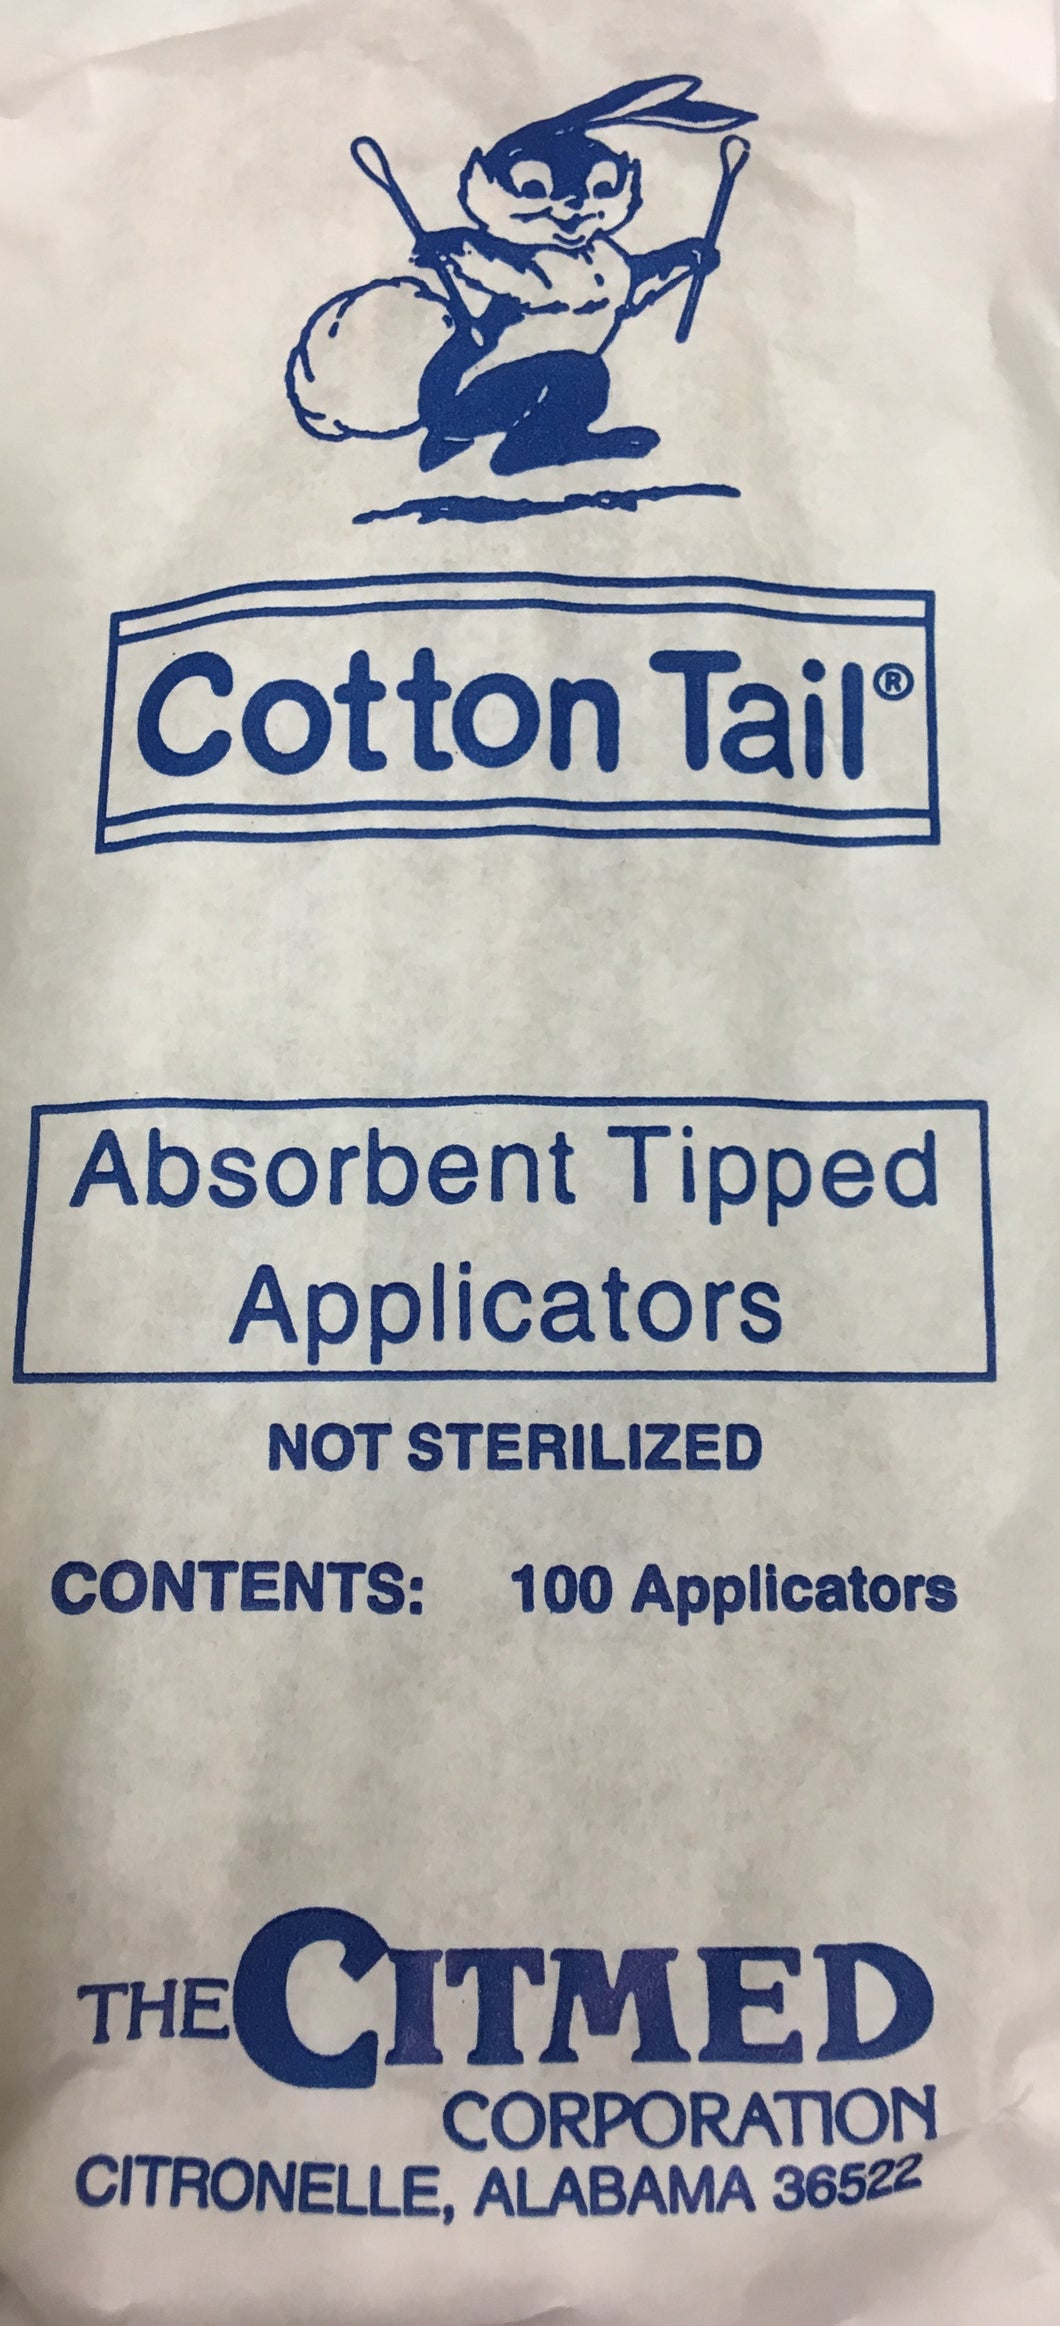 Cotton Tail - Absorbent tipped applicators / 